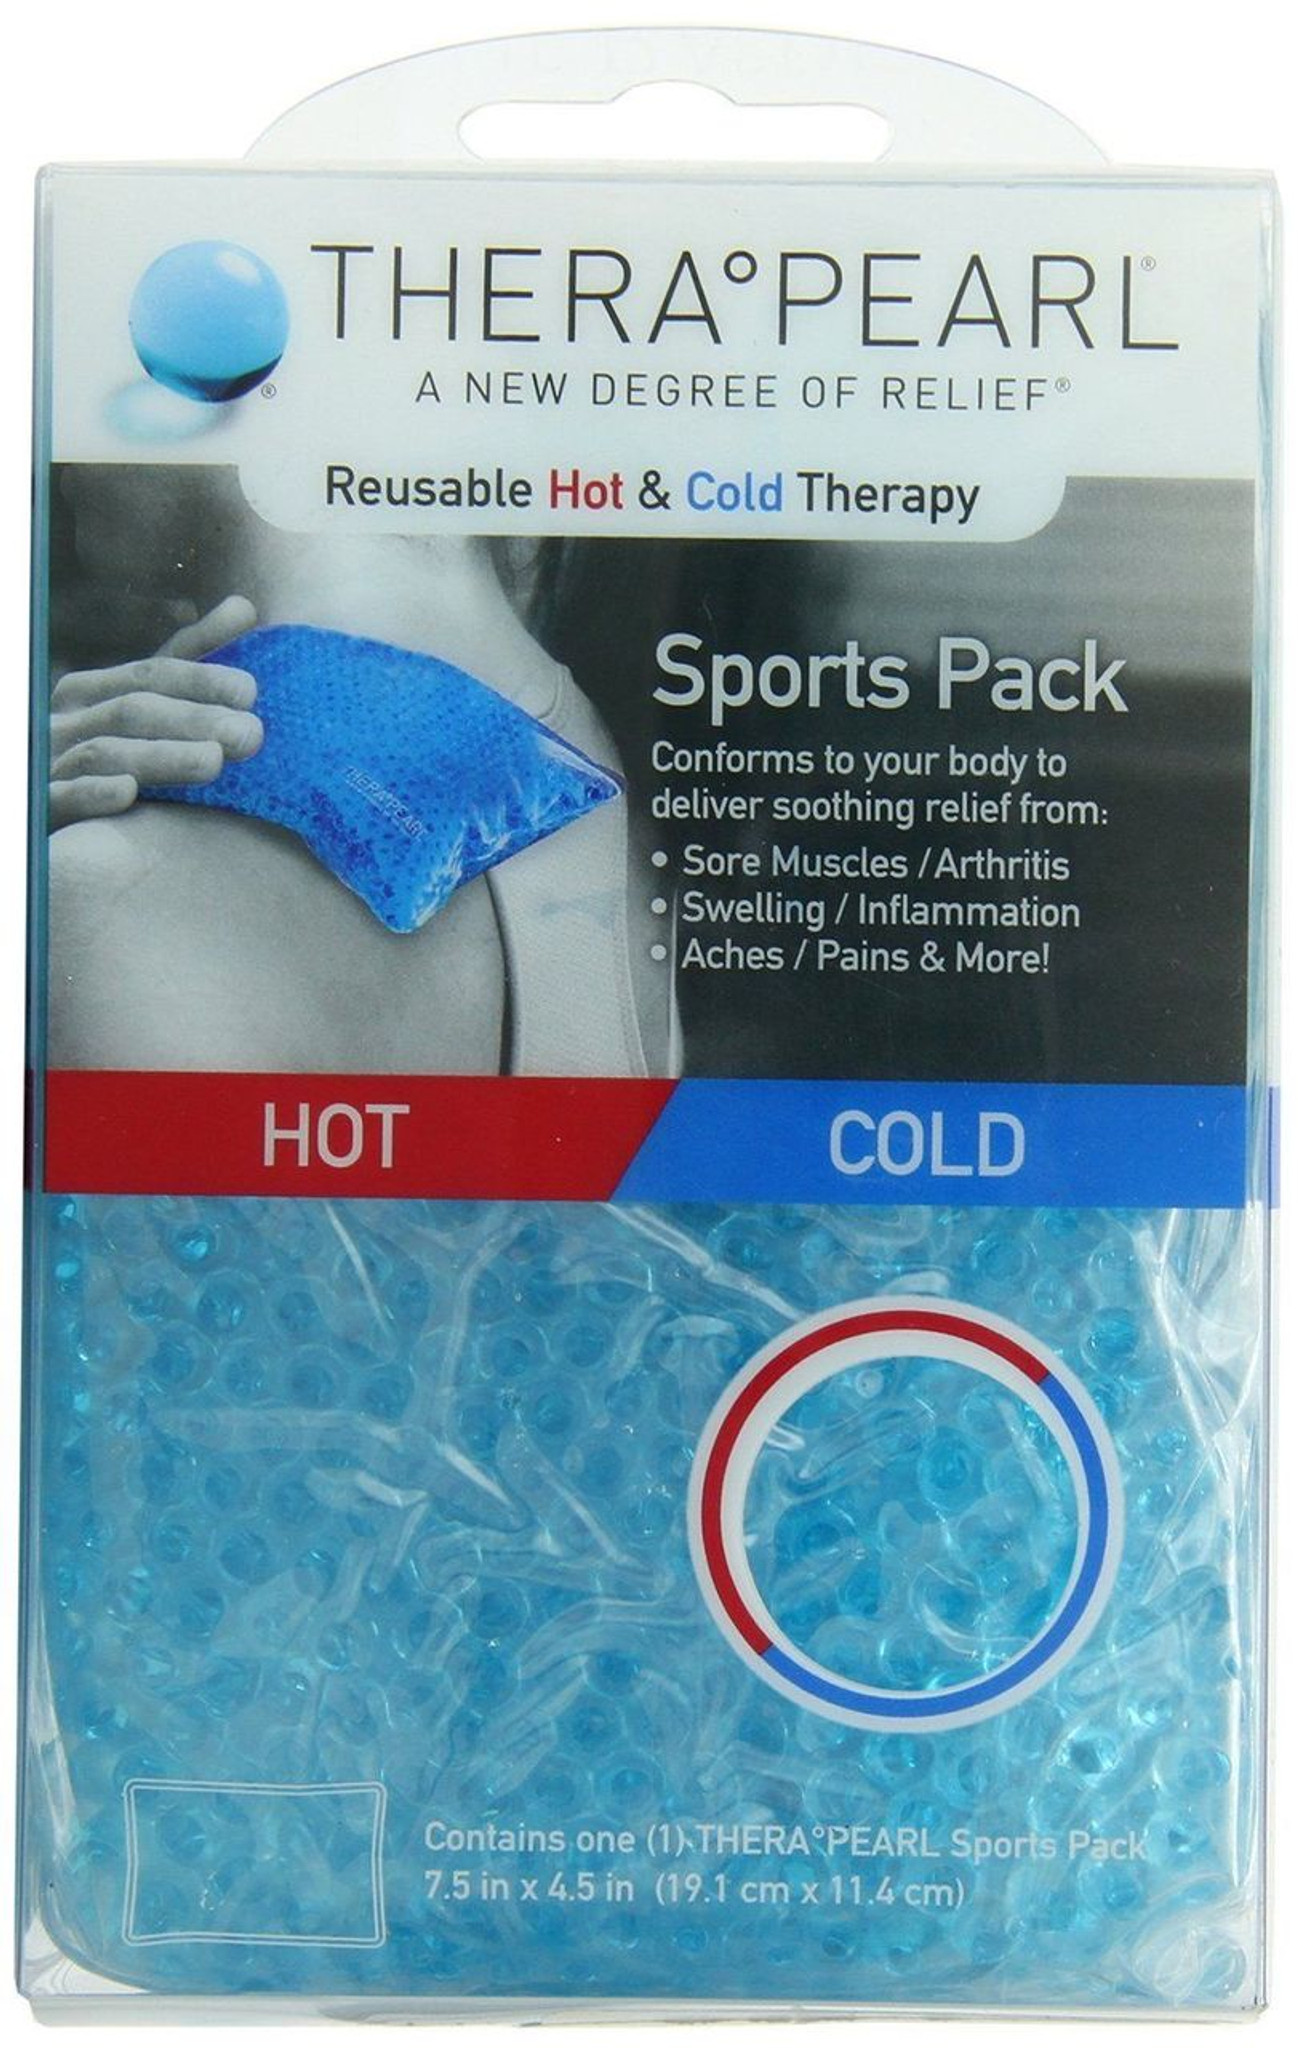 TheraPearl 3-in-1 Breast Therapy Gel Packs